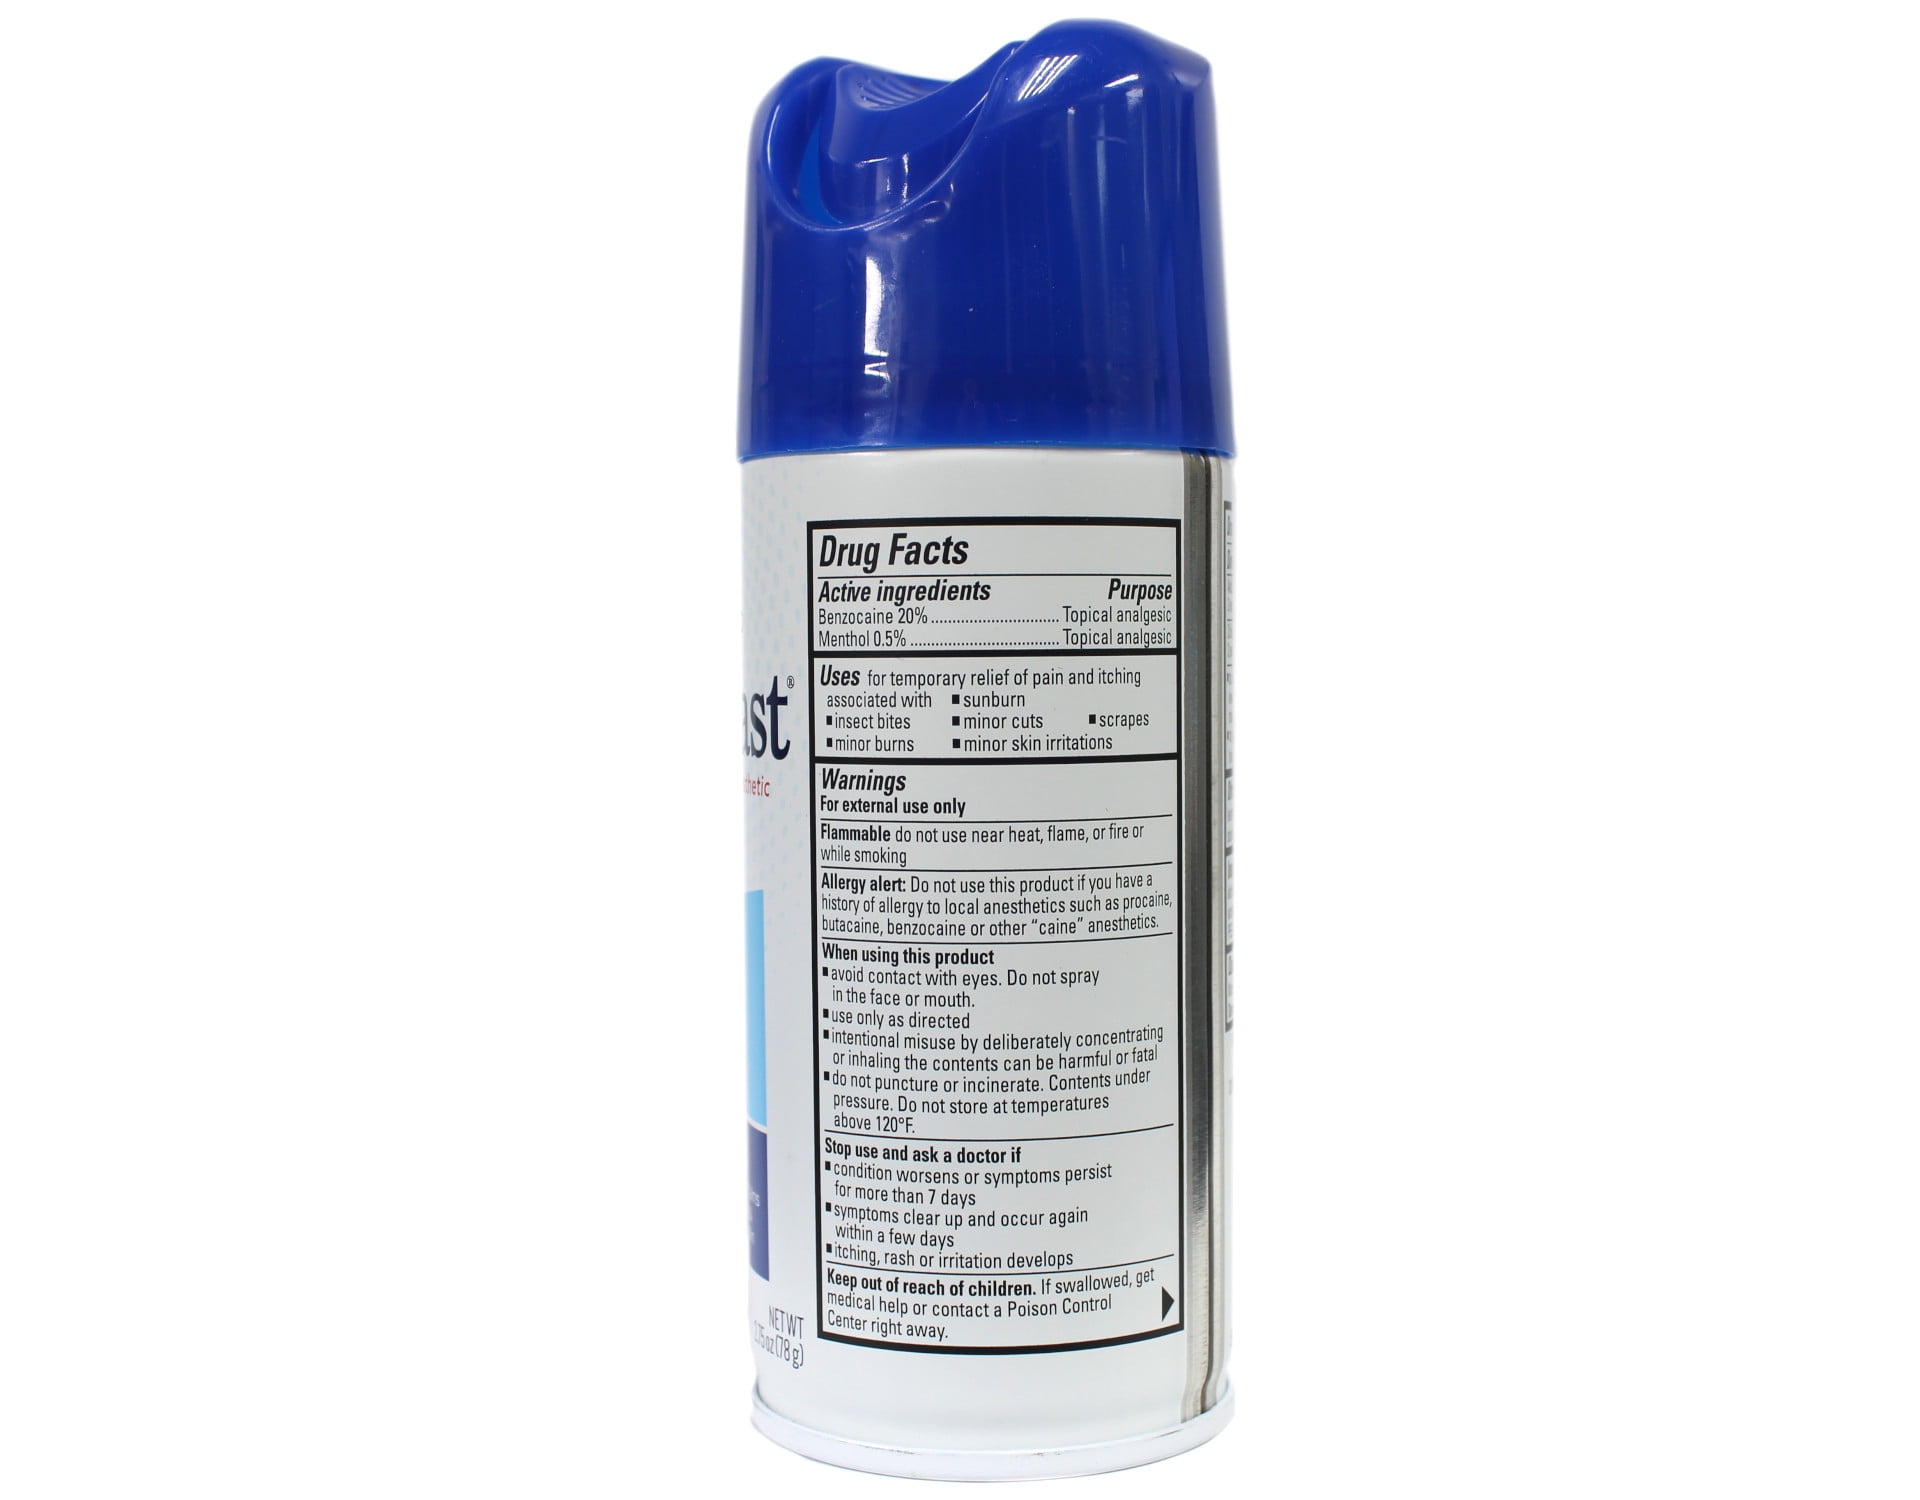 Dermoplast Pain Relieving Spray, Pain, Burn & Itch, Hosp, Search